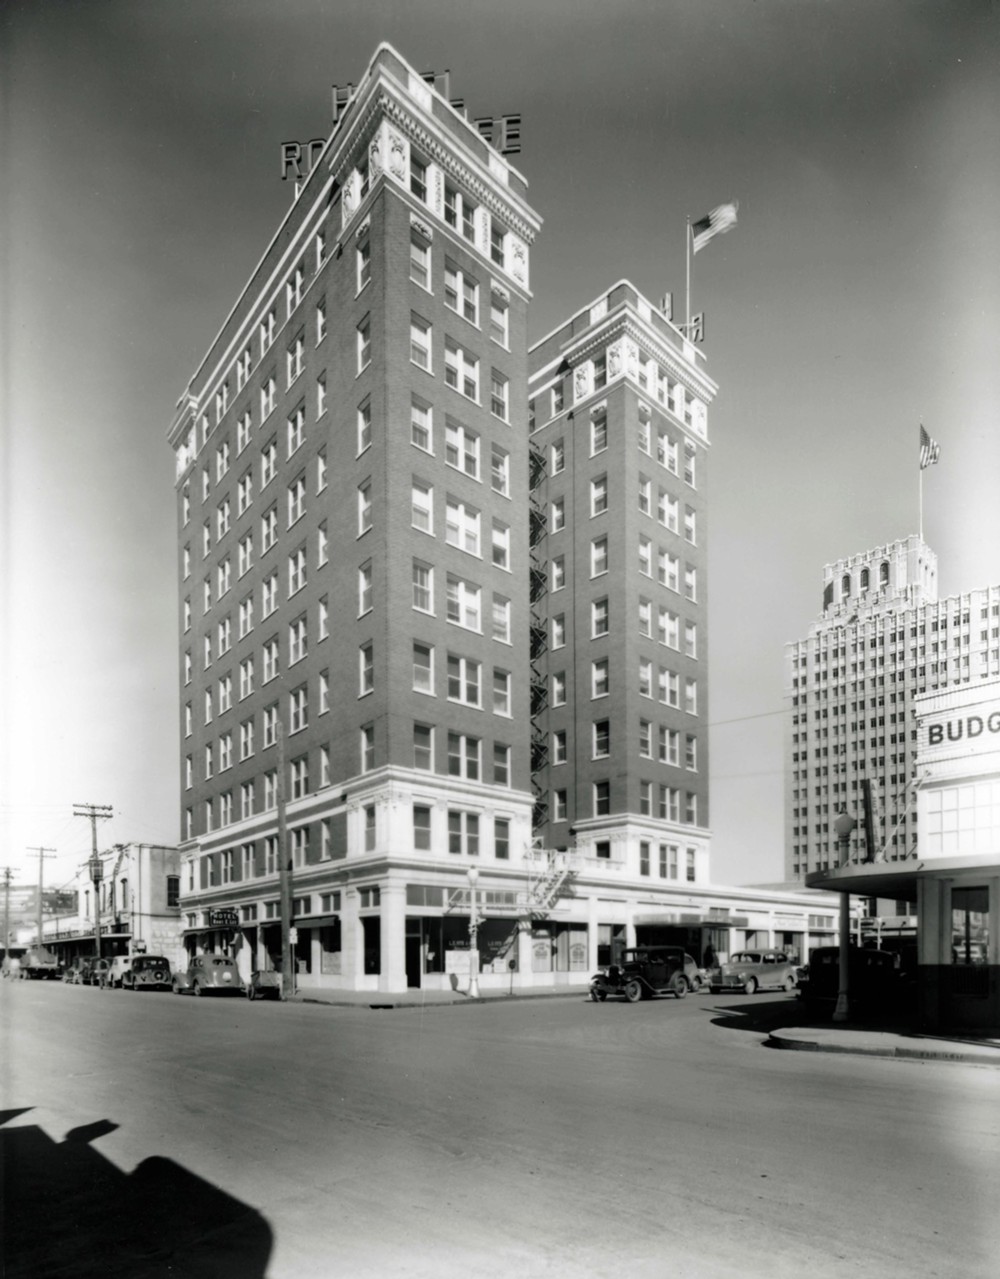 Robert E. Lee Hotel, San Antonio Texas Historic view of south and west elevations (1938)